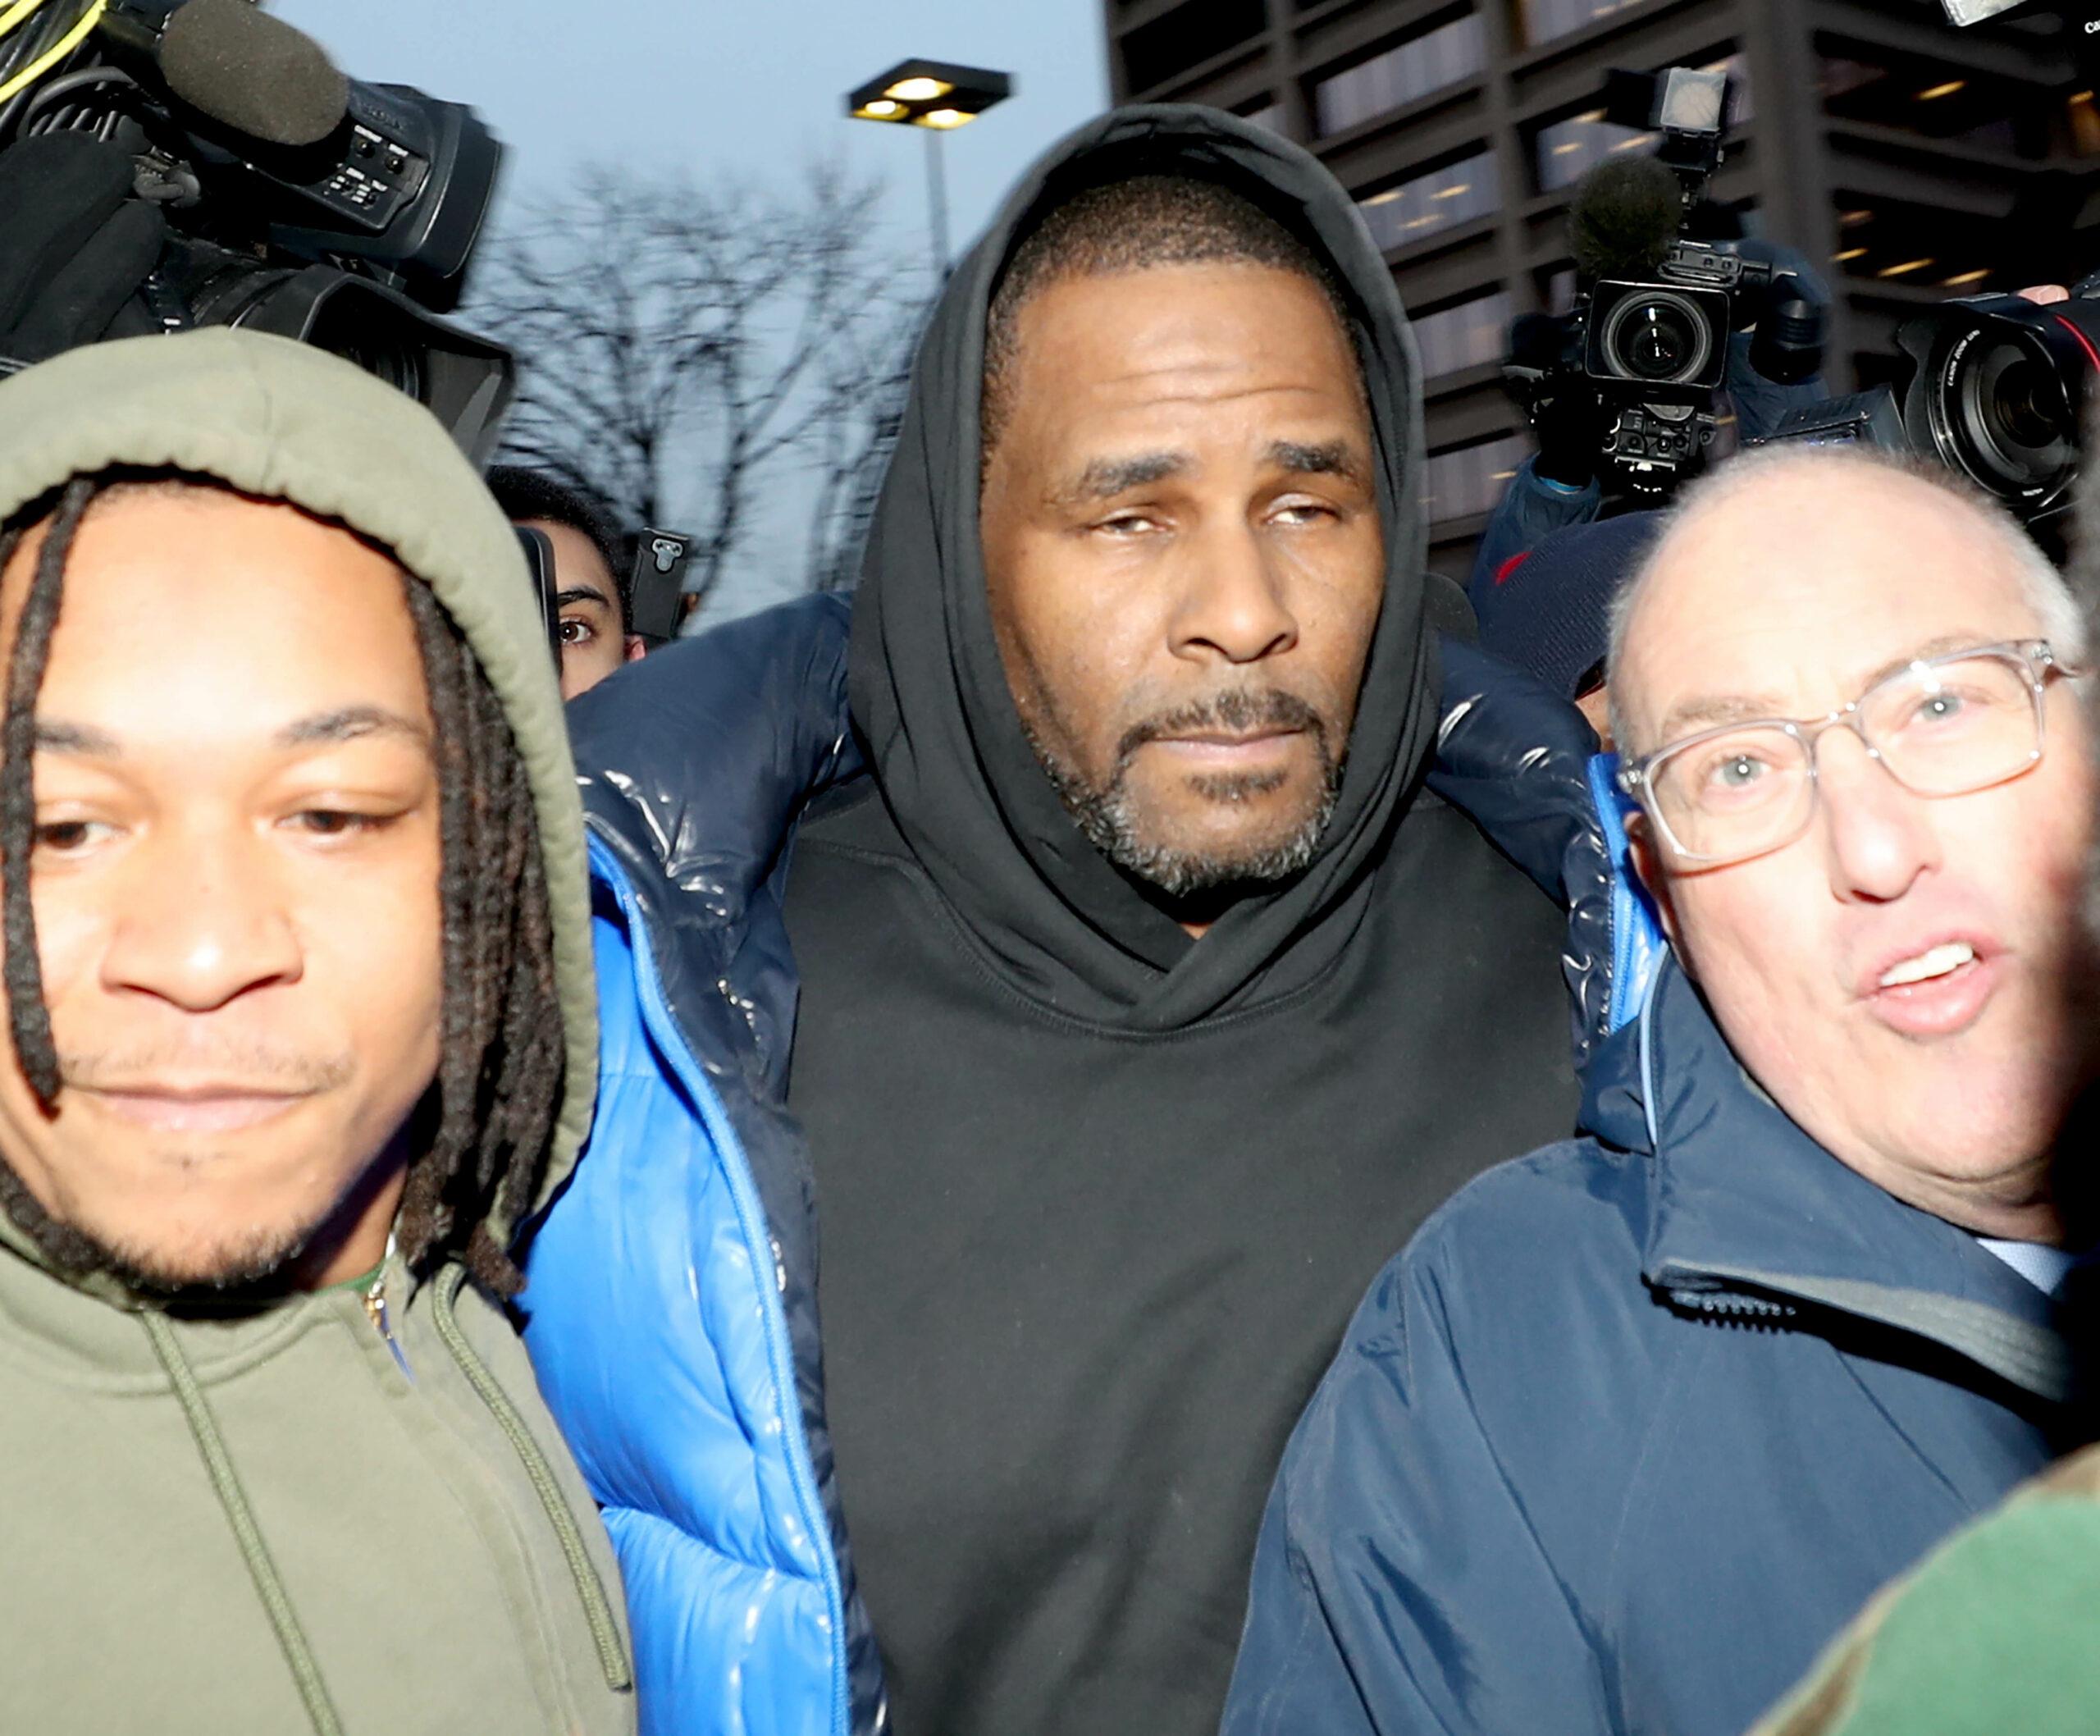 R. Kelly leaves Cook County Detention Center